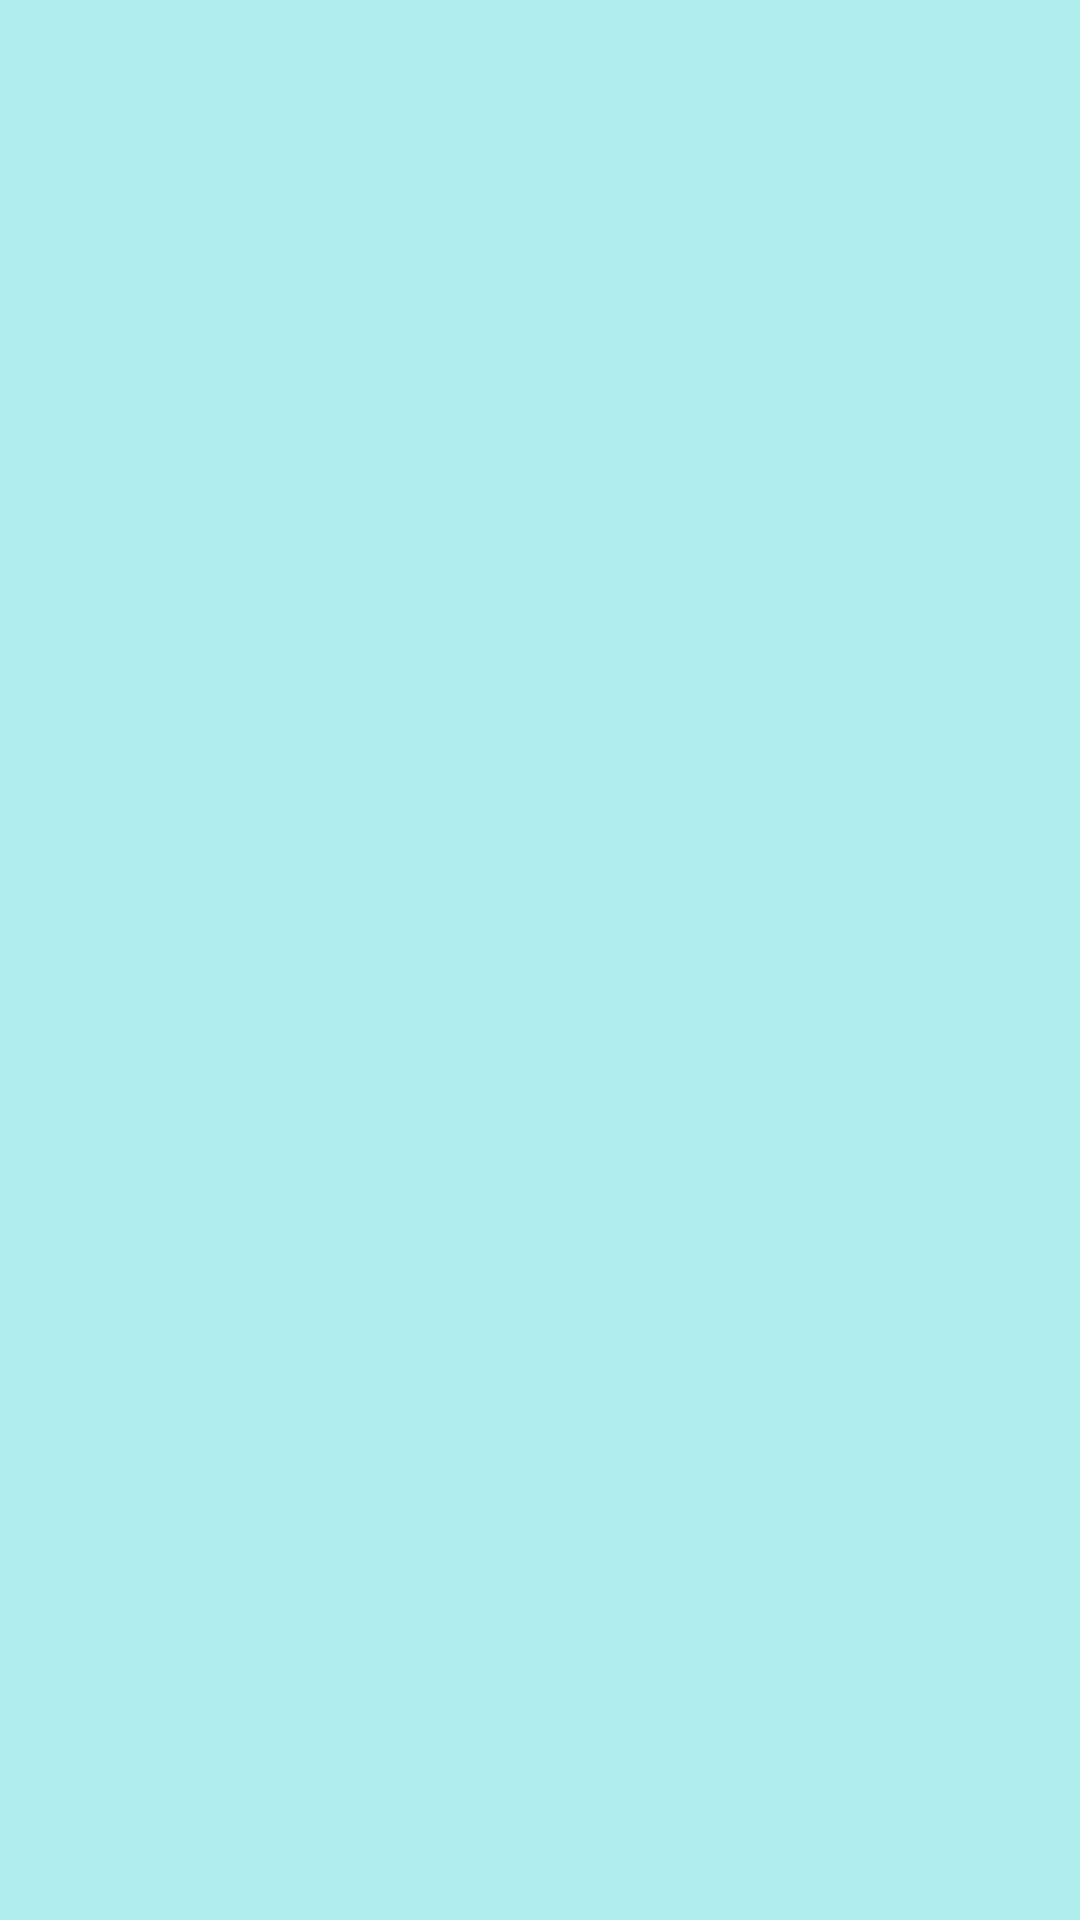 1080x1920 Pale Turquoise Solid Color Background